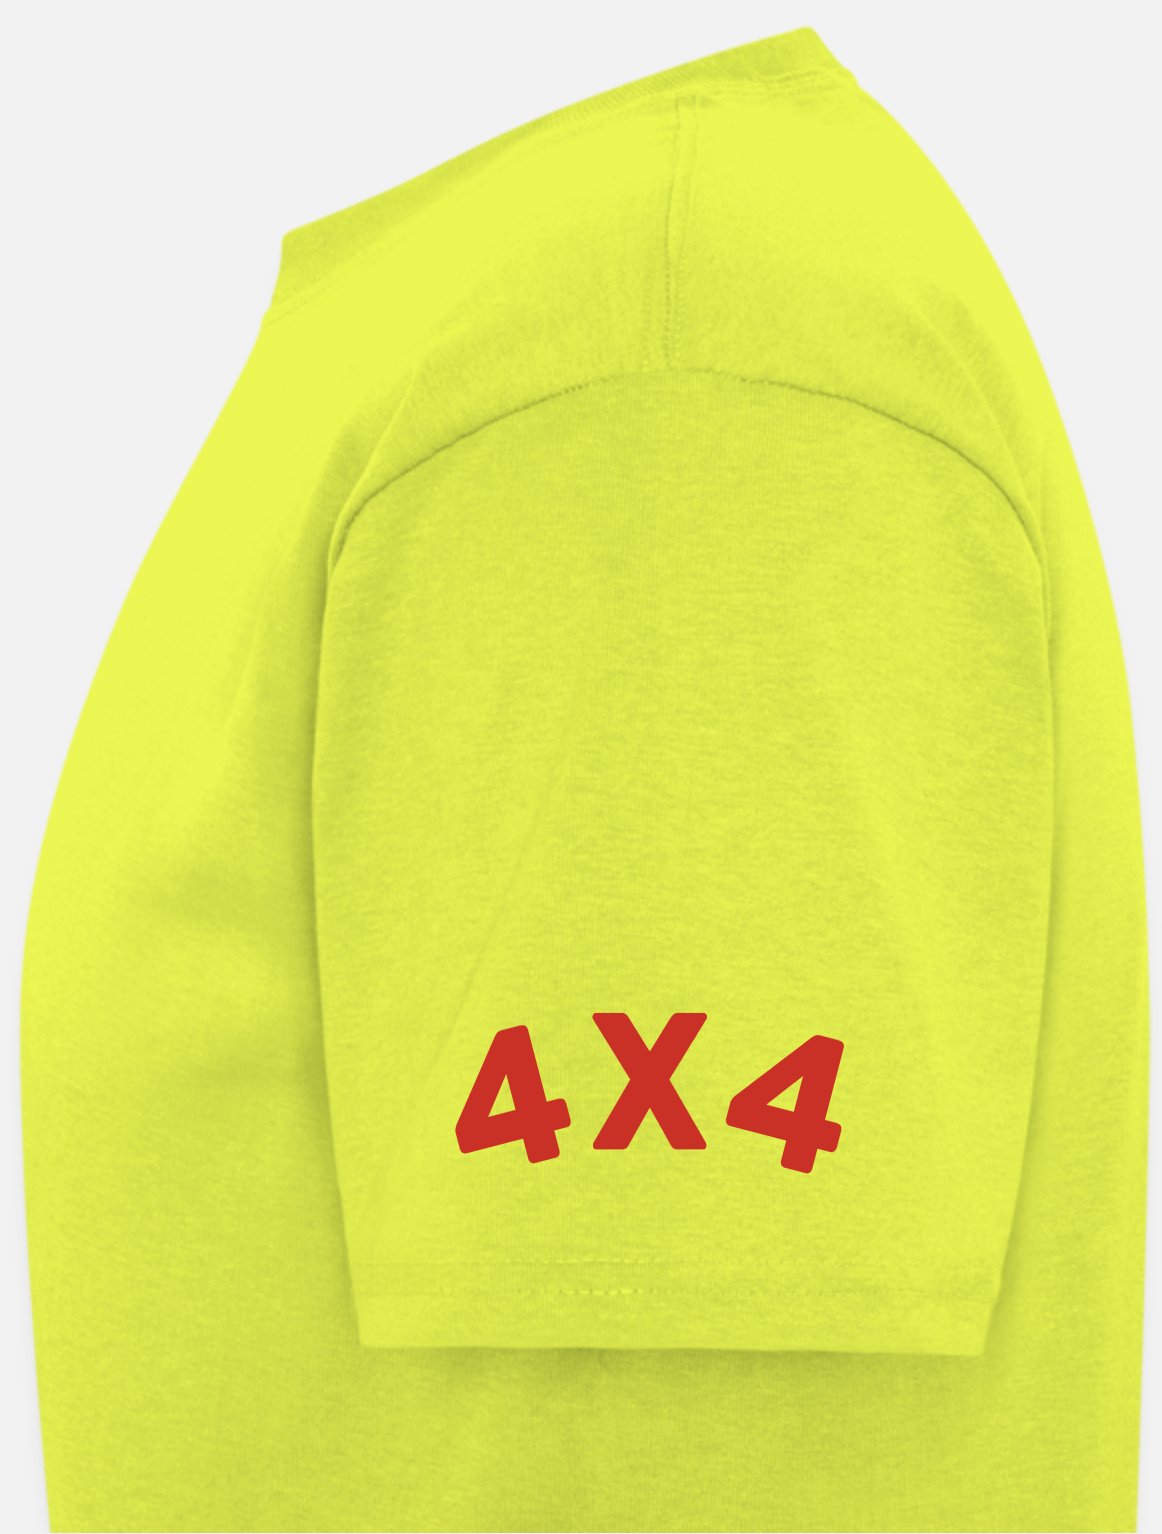 NEON YELLOW T-SHIRT BY OFFROAD BROS. 4X4